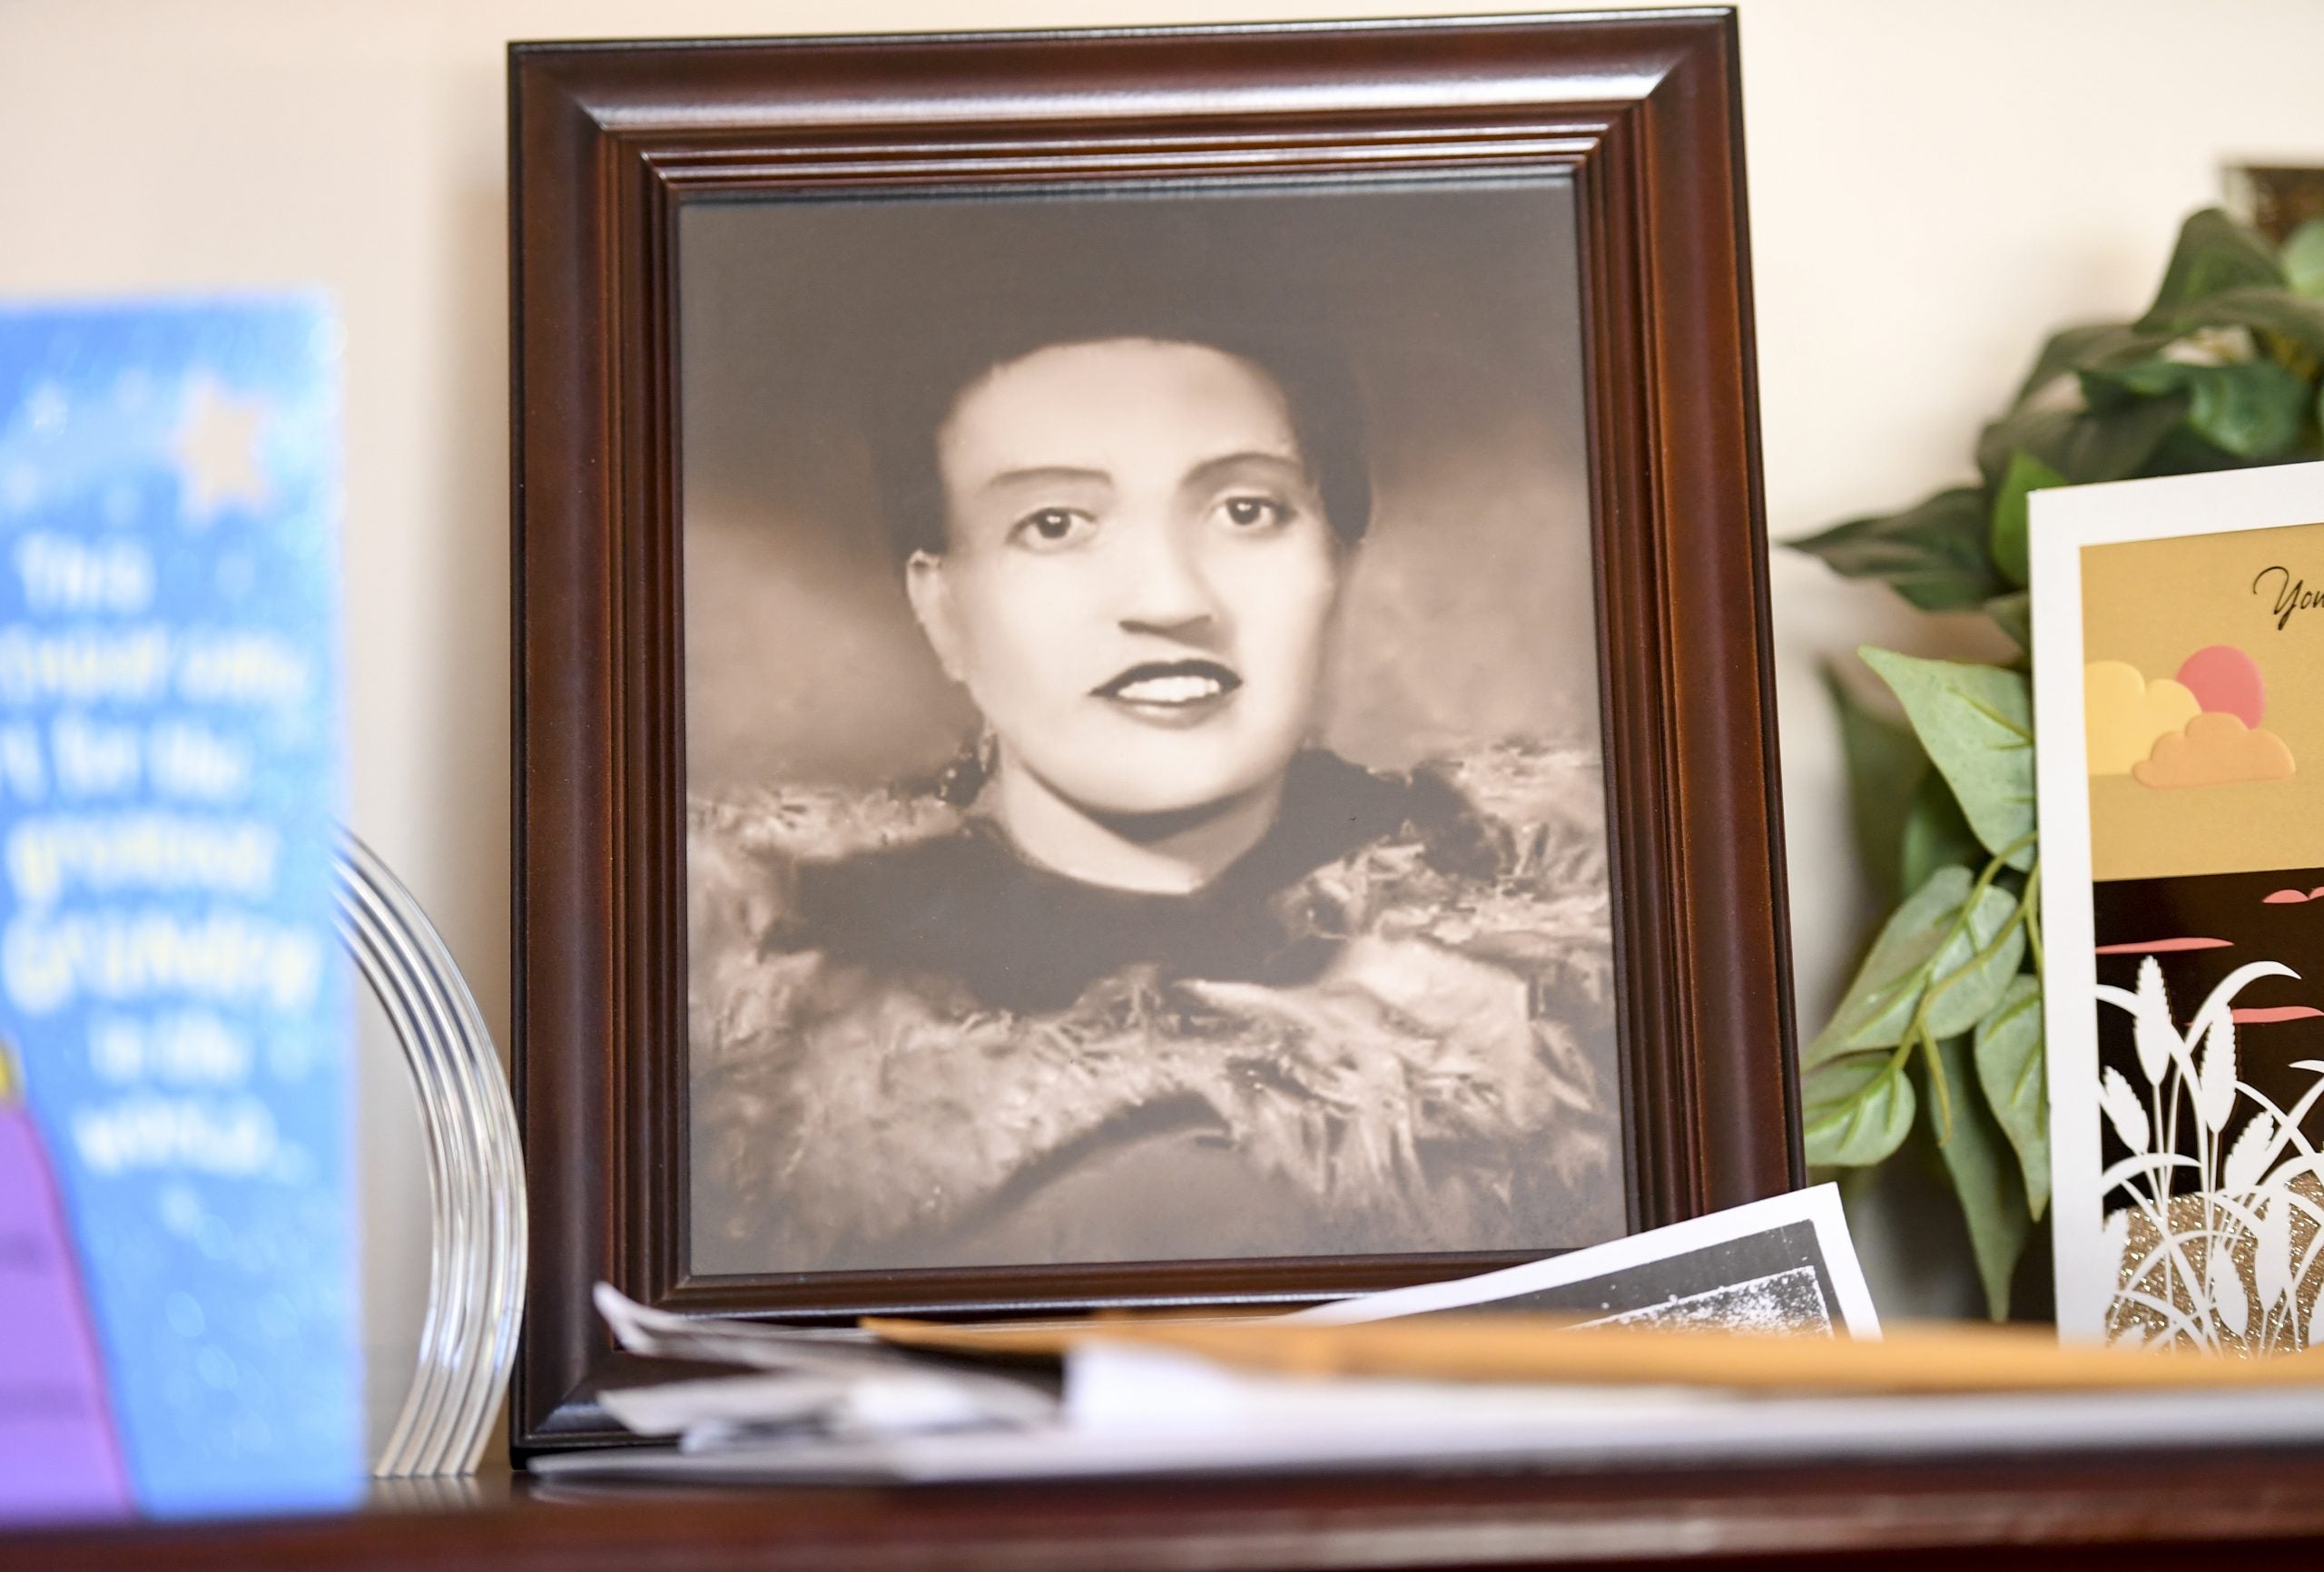 Family Members Of Henrietta Lacks Reach Settlement After Her Cells Have Advanced Modern Medical Research